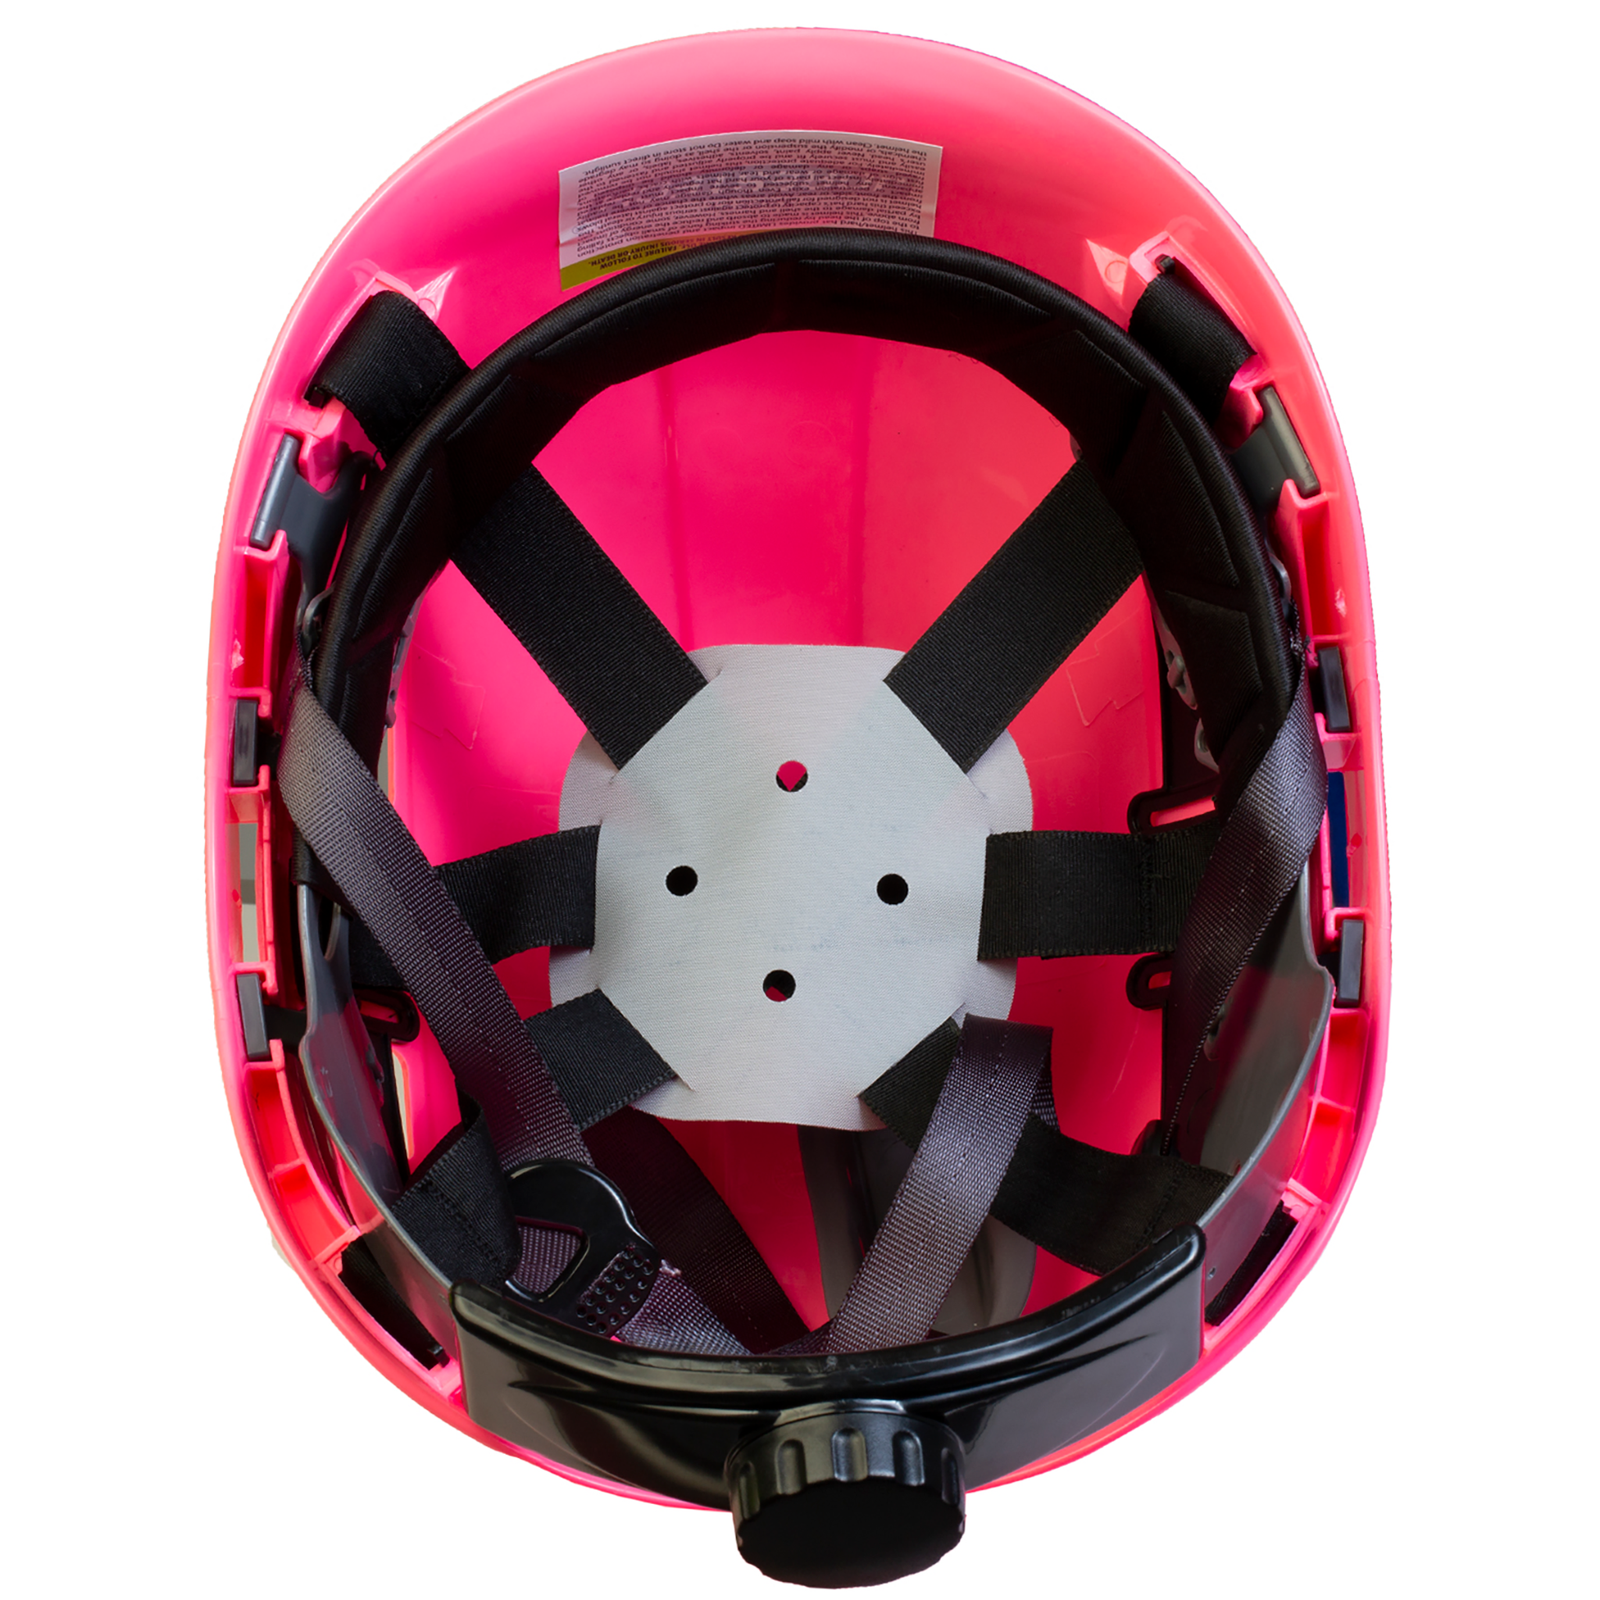 bottom view of the Jorestech pink ventilated rescue hard hat with adjustable 6 point suspension installed